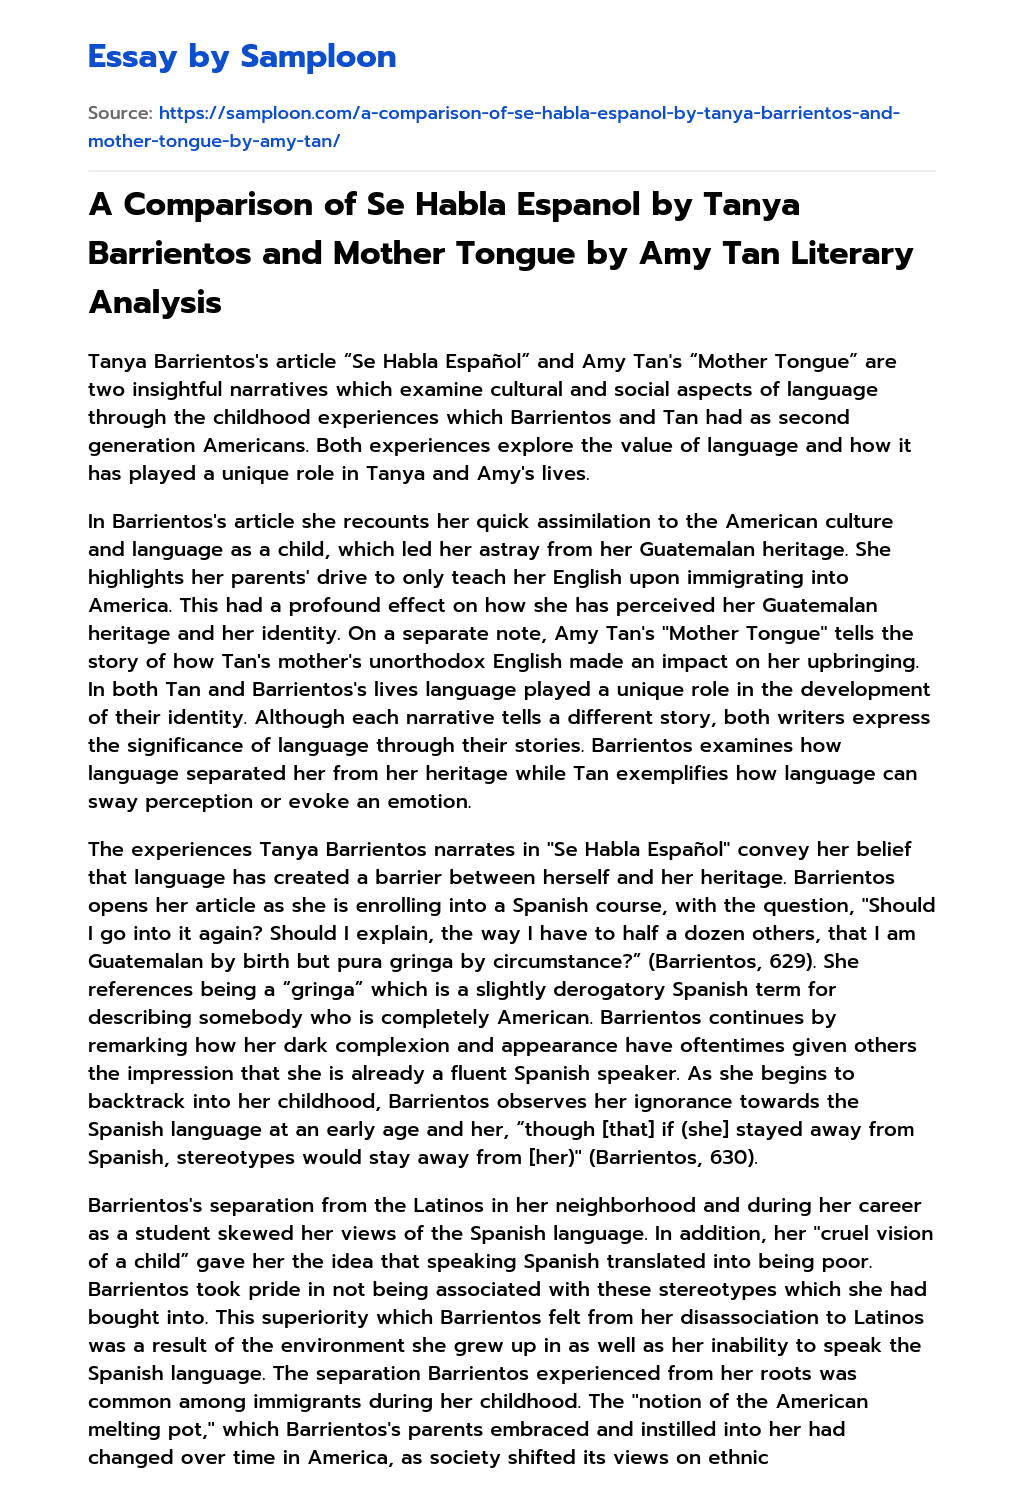 A Comparison of Se Habla Espanol by Tanya Barrientos and Mother Tongue by Amy Tan Literary Analysis essay